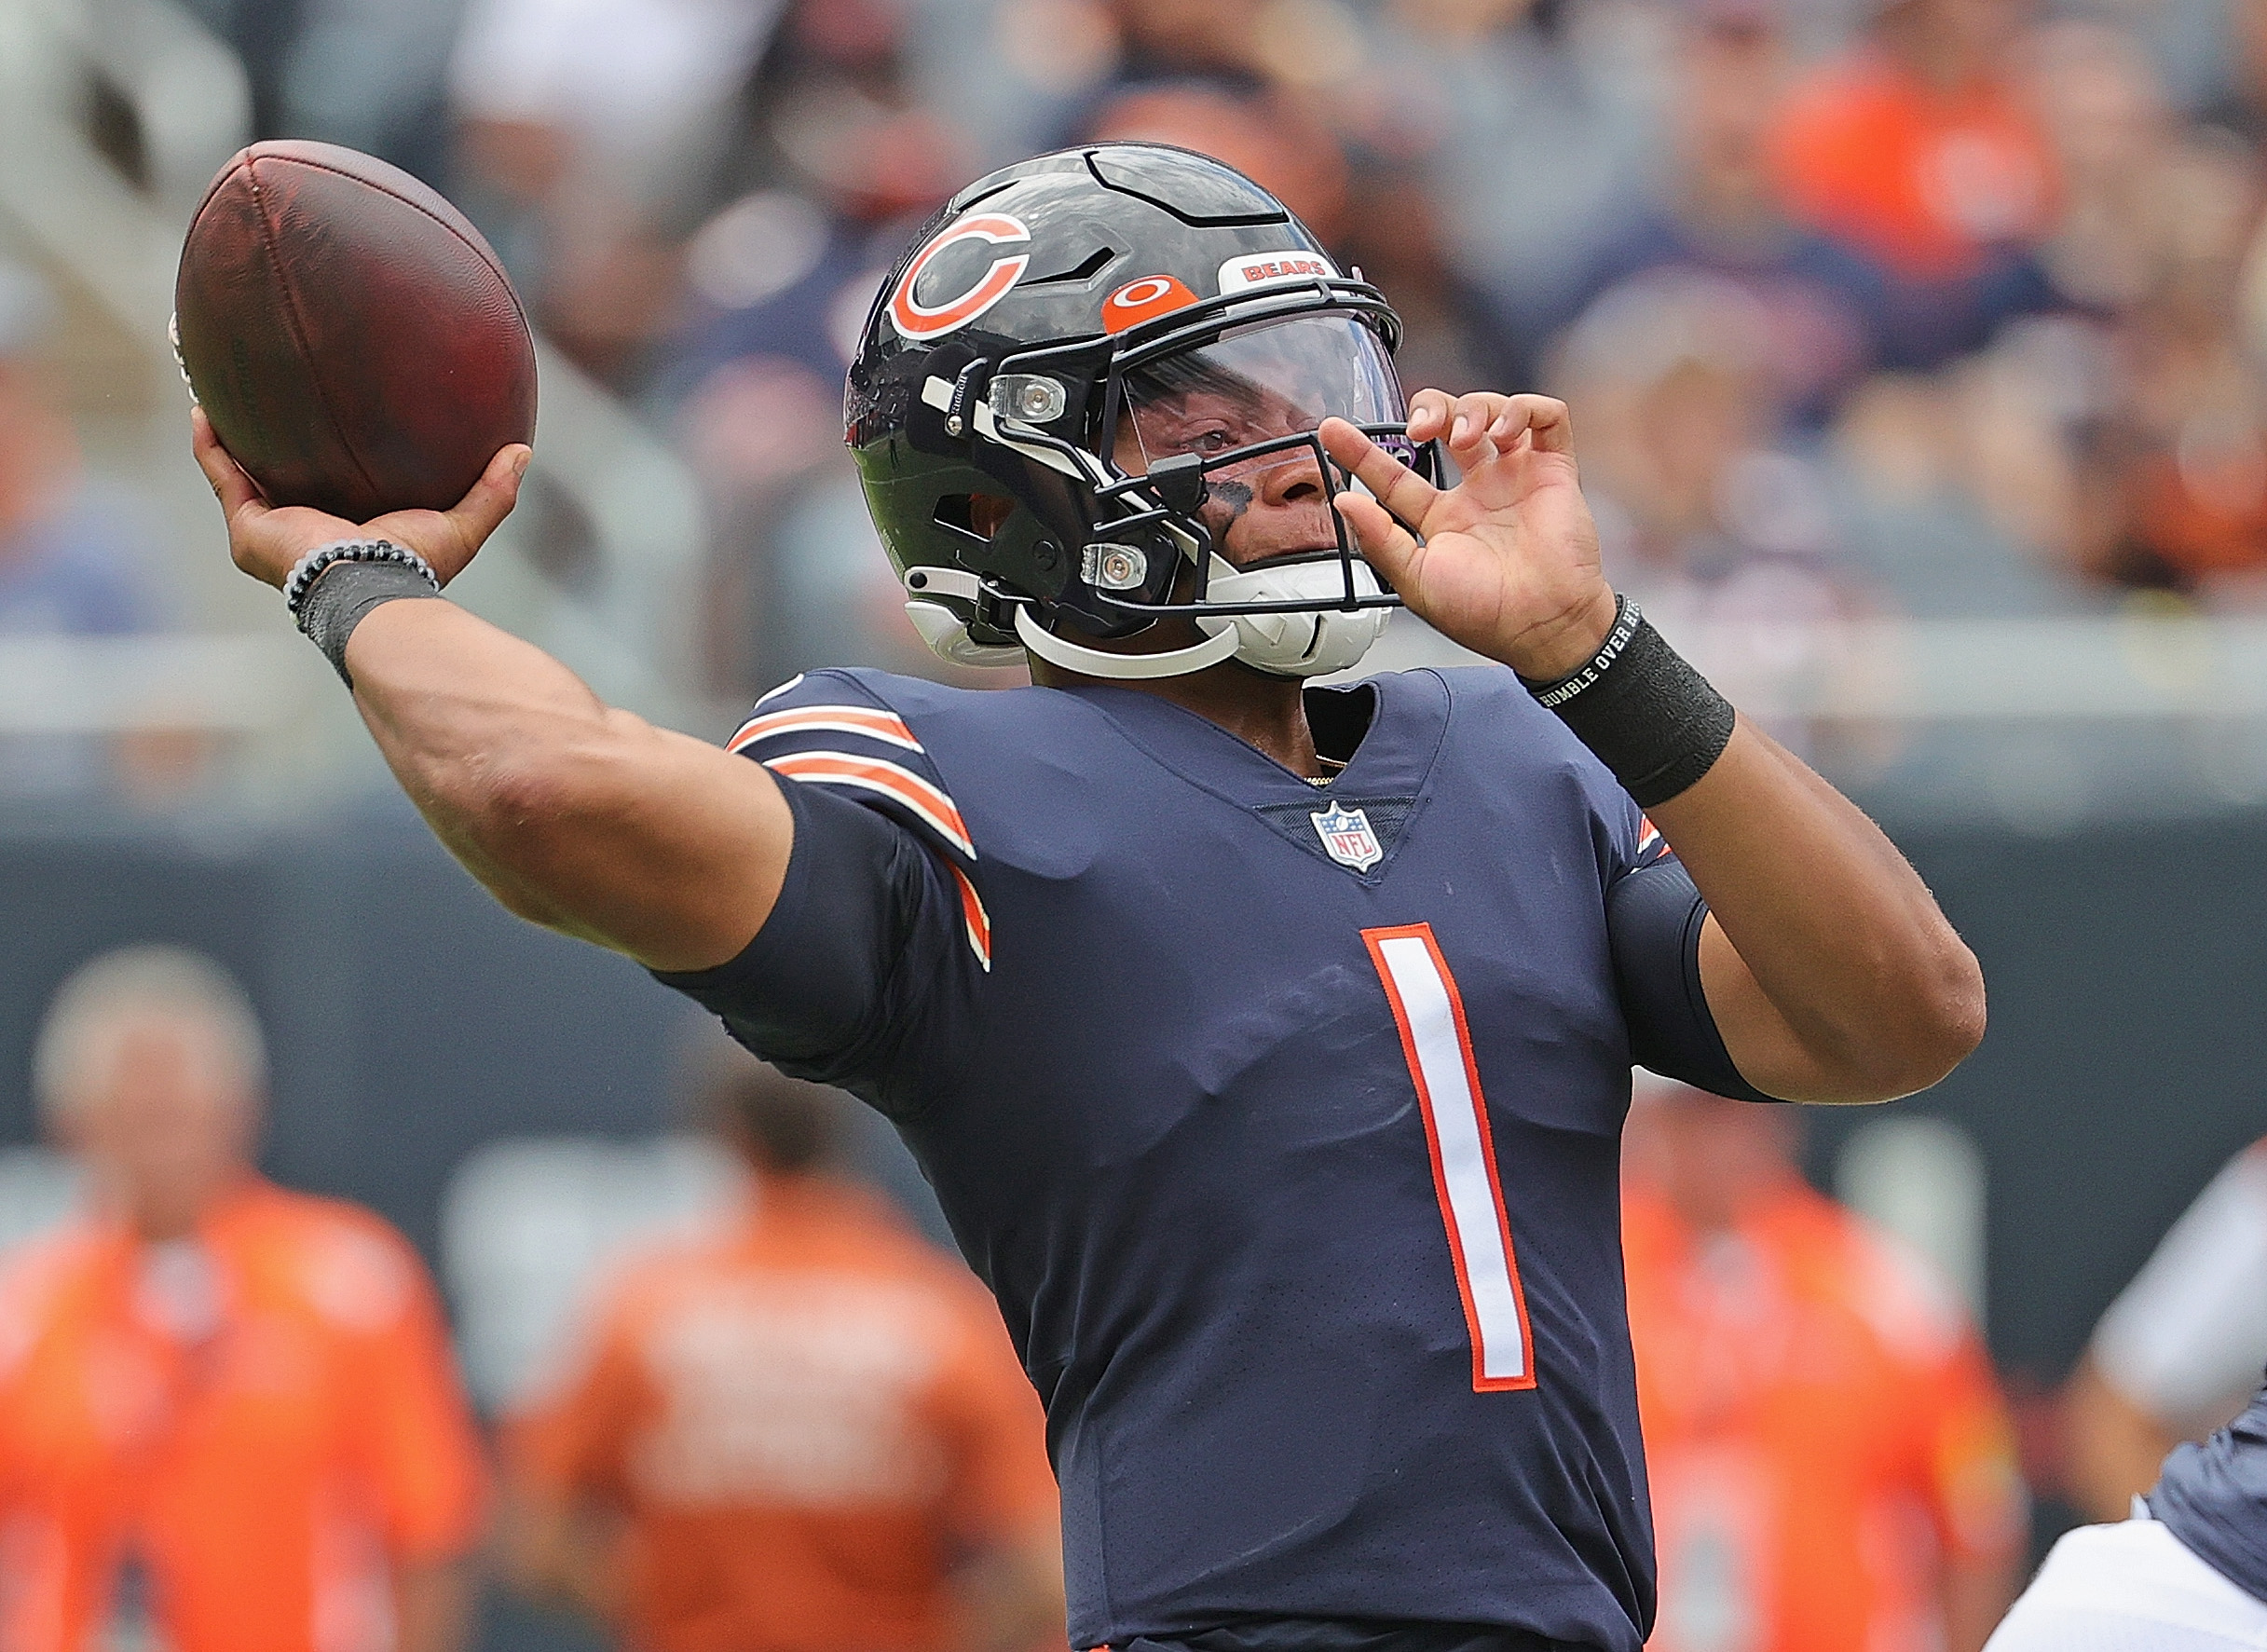 Justin Fields throws a pass during a Chicago Bears preseason game